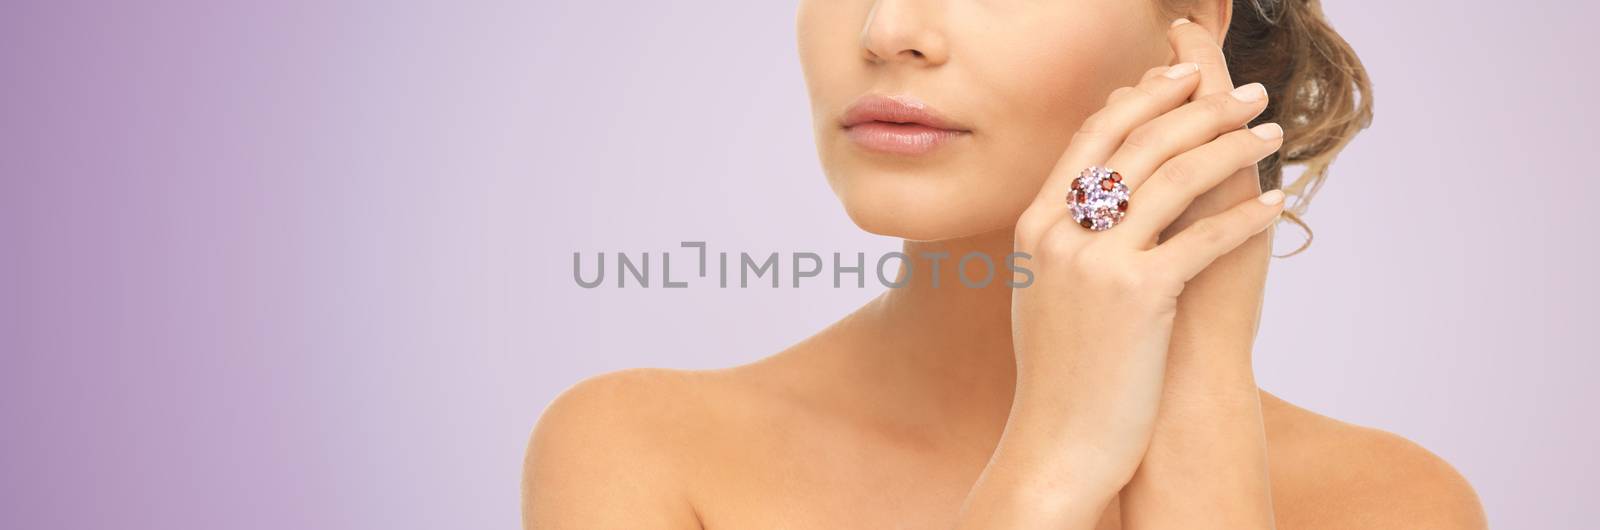 beauty, jewelry, people and accessories concept - close up of woman with cocktail ring on hand over violet background